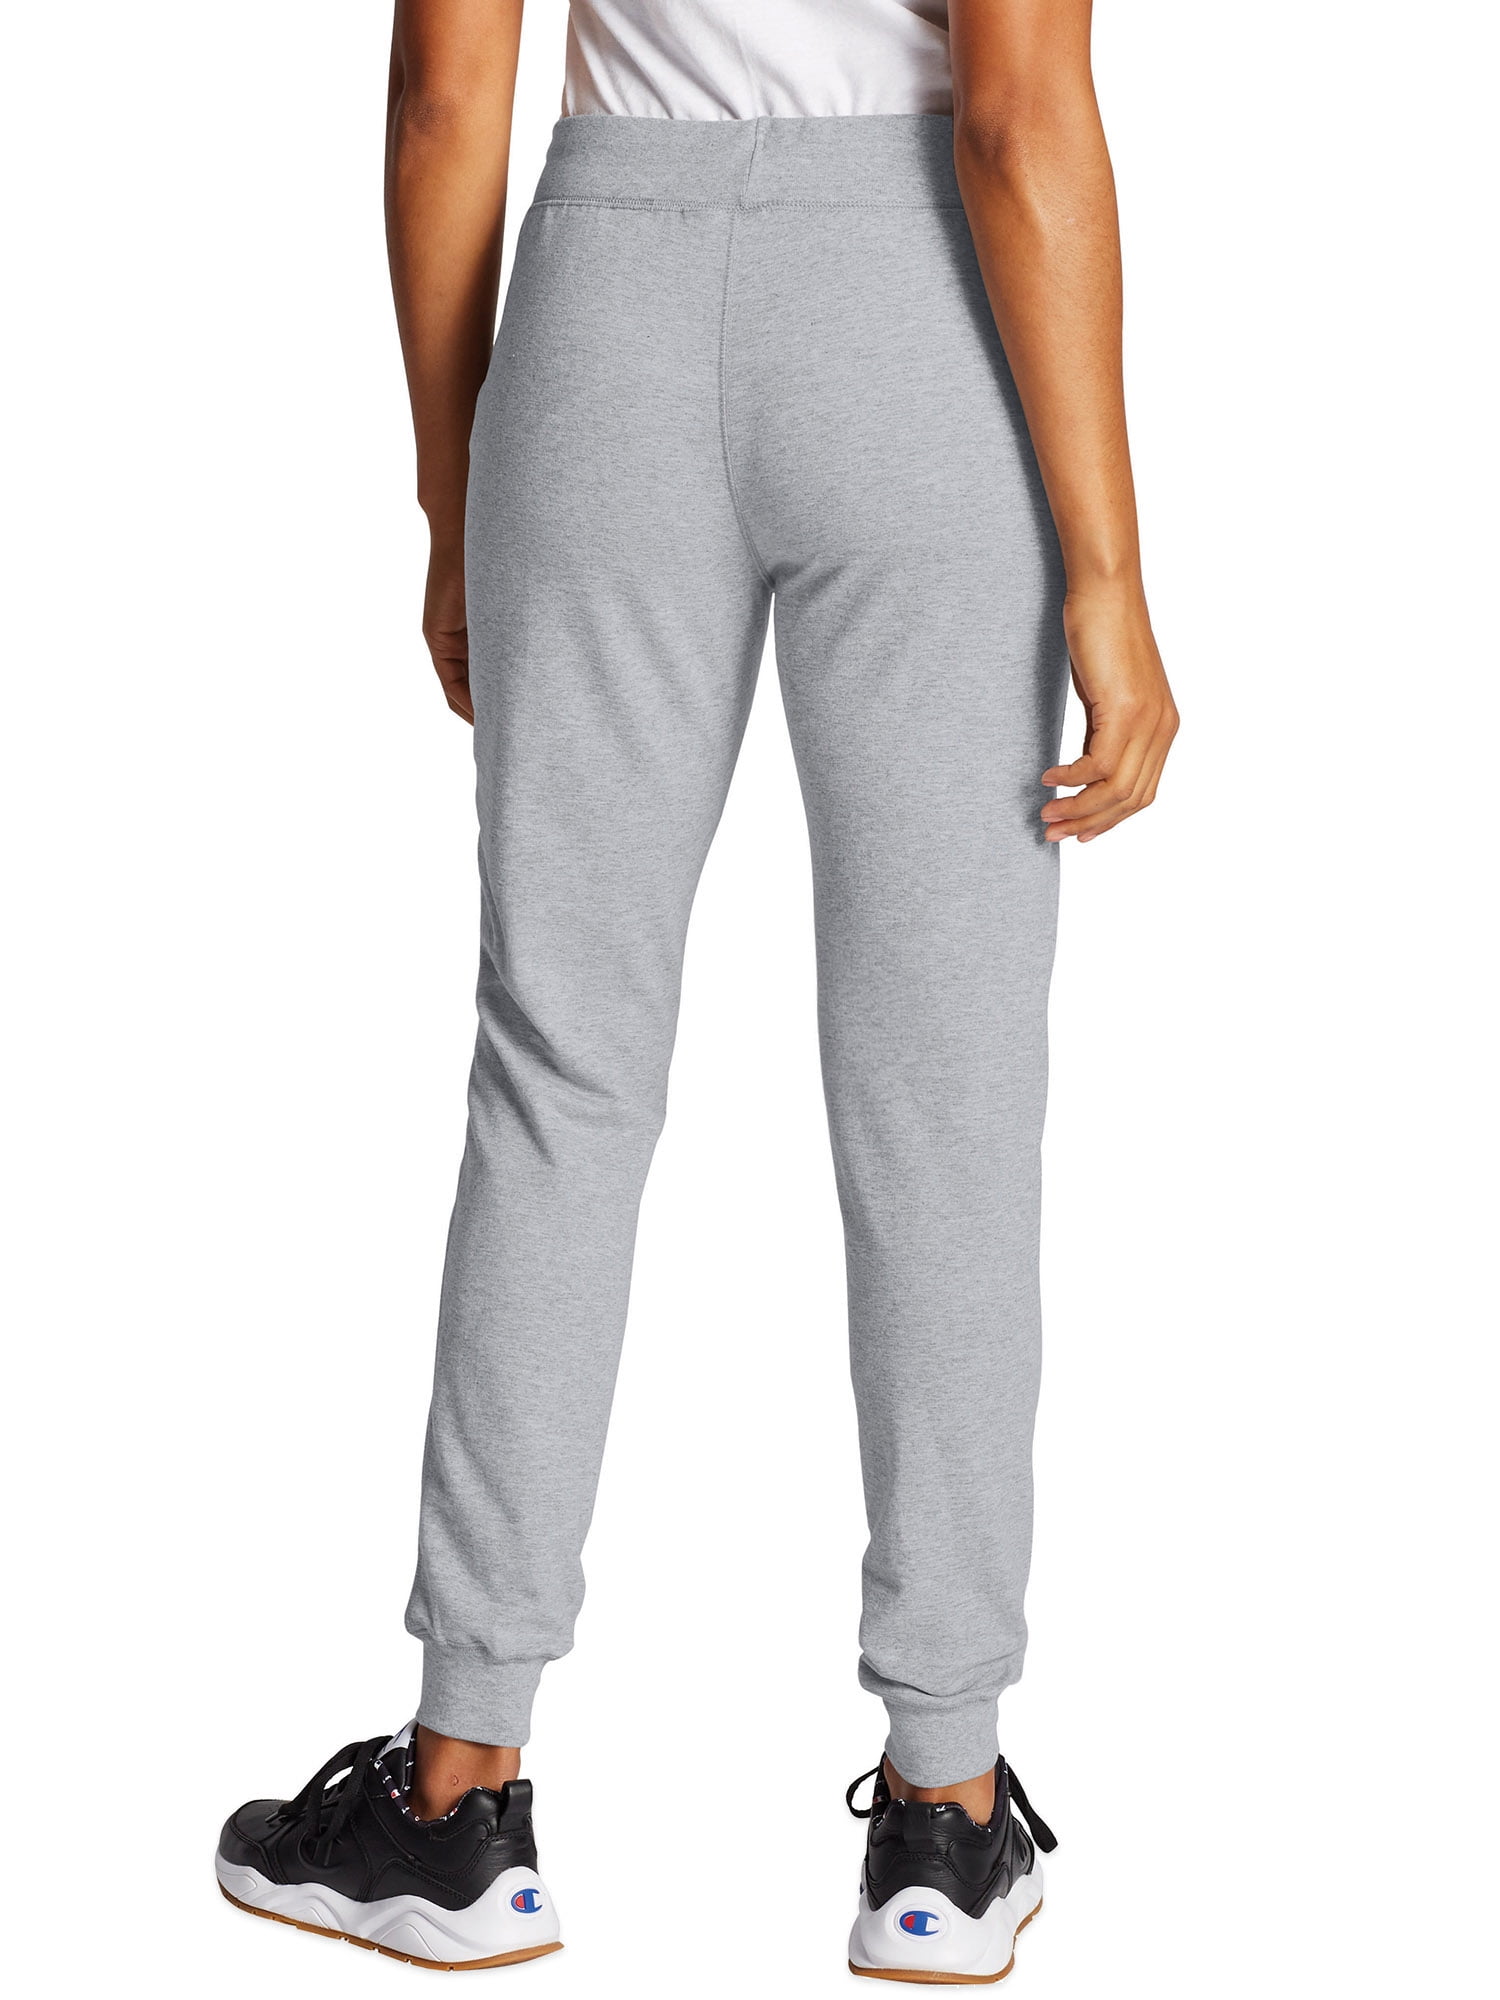 Lead Charcoal Gray Size SMALL NEW Champion Ladies' French Terry Joggers Pant 